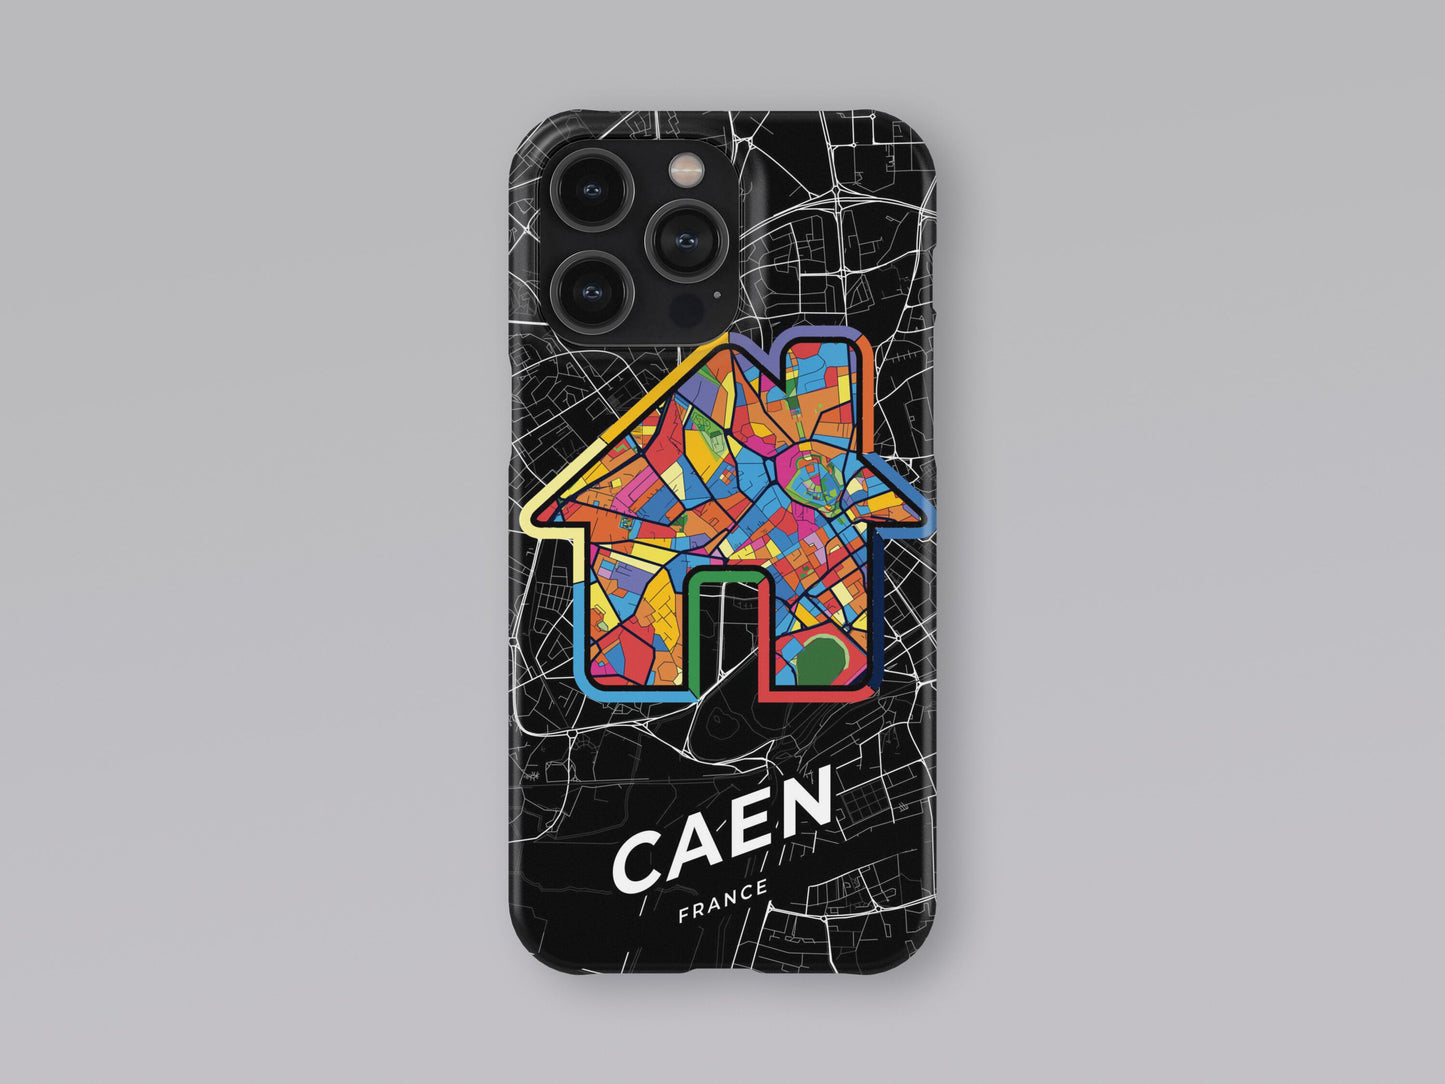 Caen France slim phone case with colorful icon. Birthday, wedding or housewarming gift. Couple match cases. 3